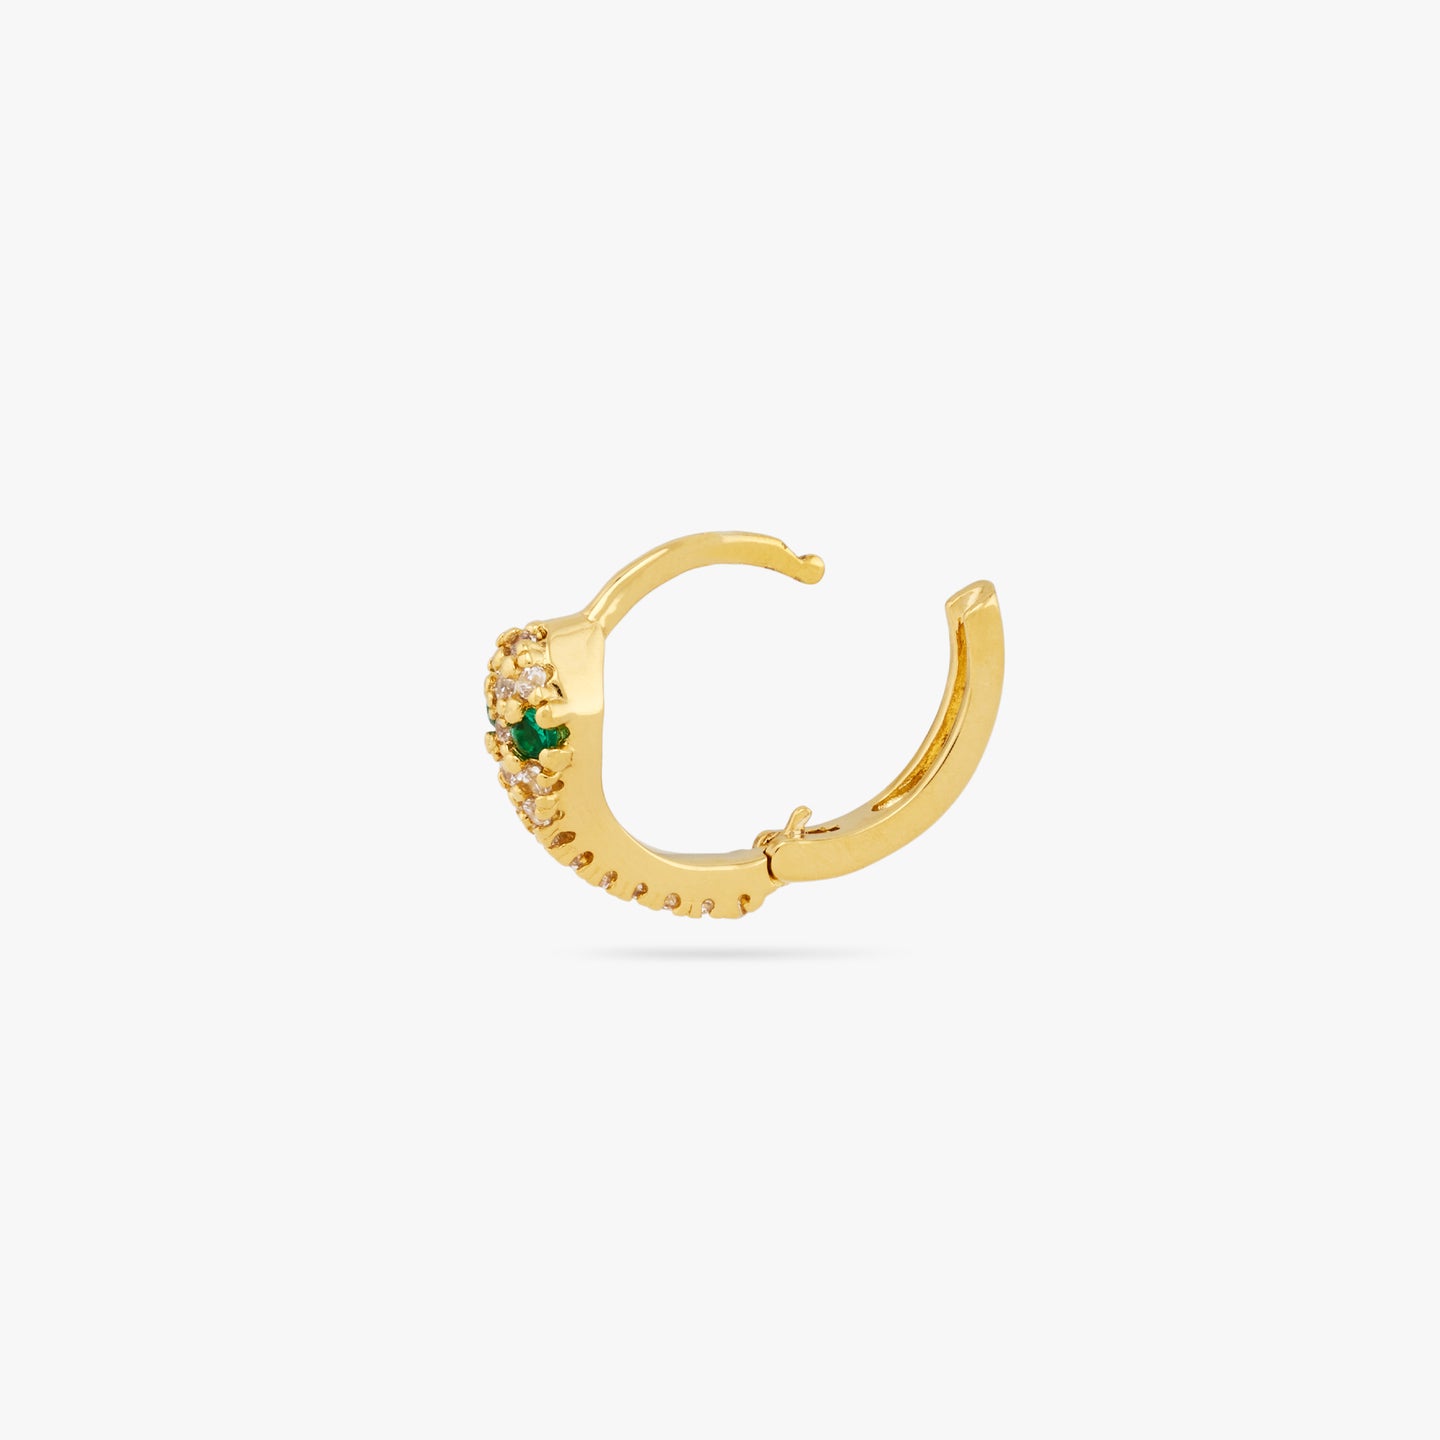 This is a gold, pave lined and serpent shaped huggie earring with green CZ eyes and its clasp undone color:null|gold/clear